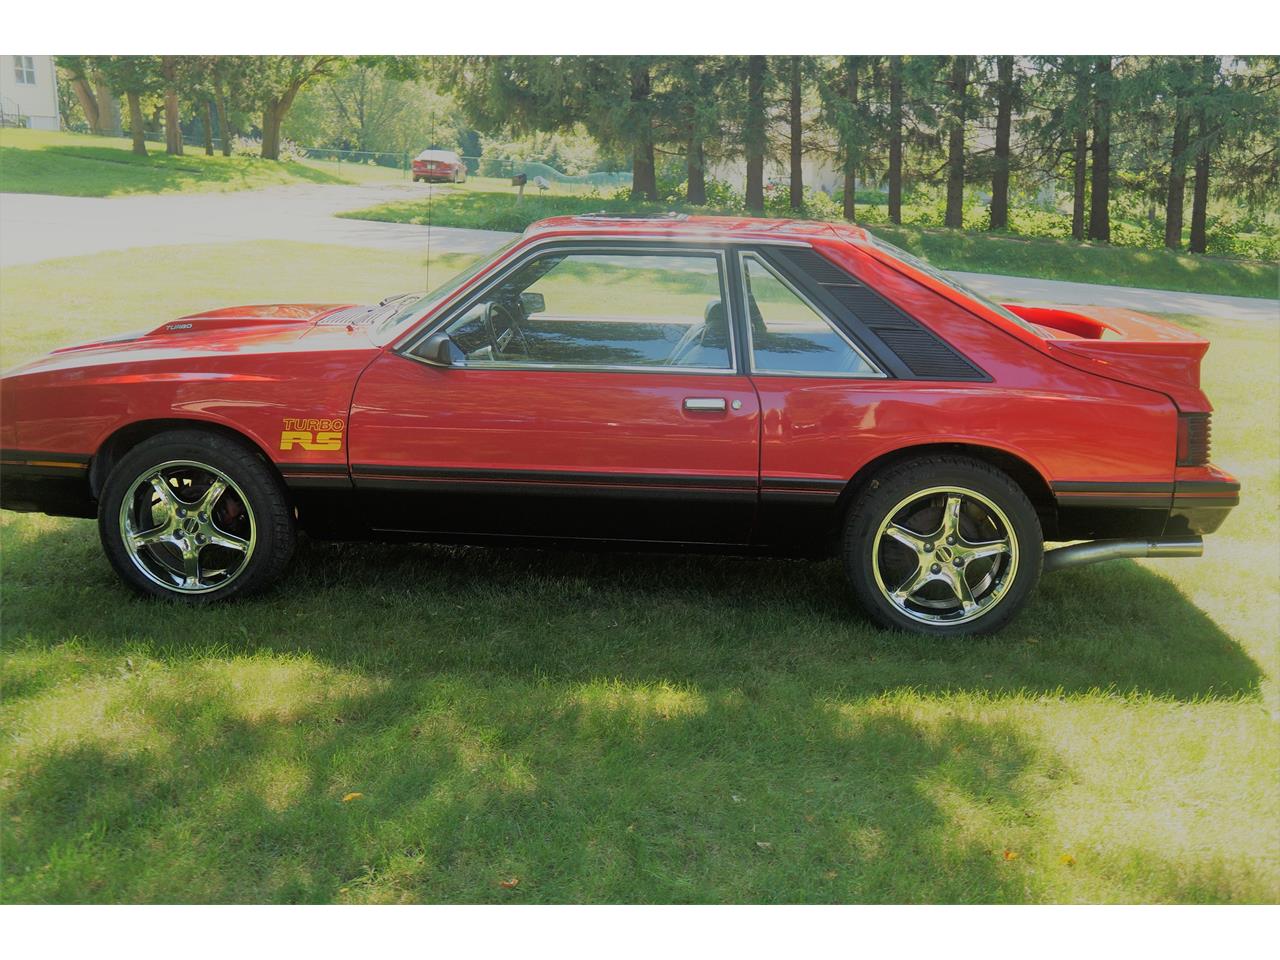 From the lost era of downsized American performance comes a low-mileage  1979 Mercury Capri RS Turbo